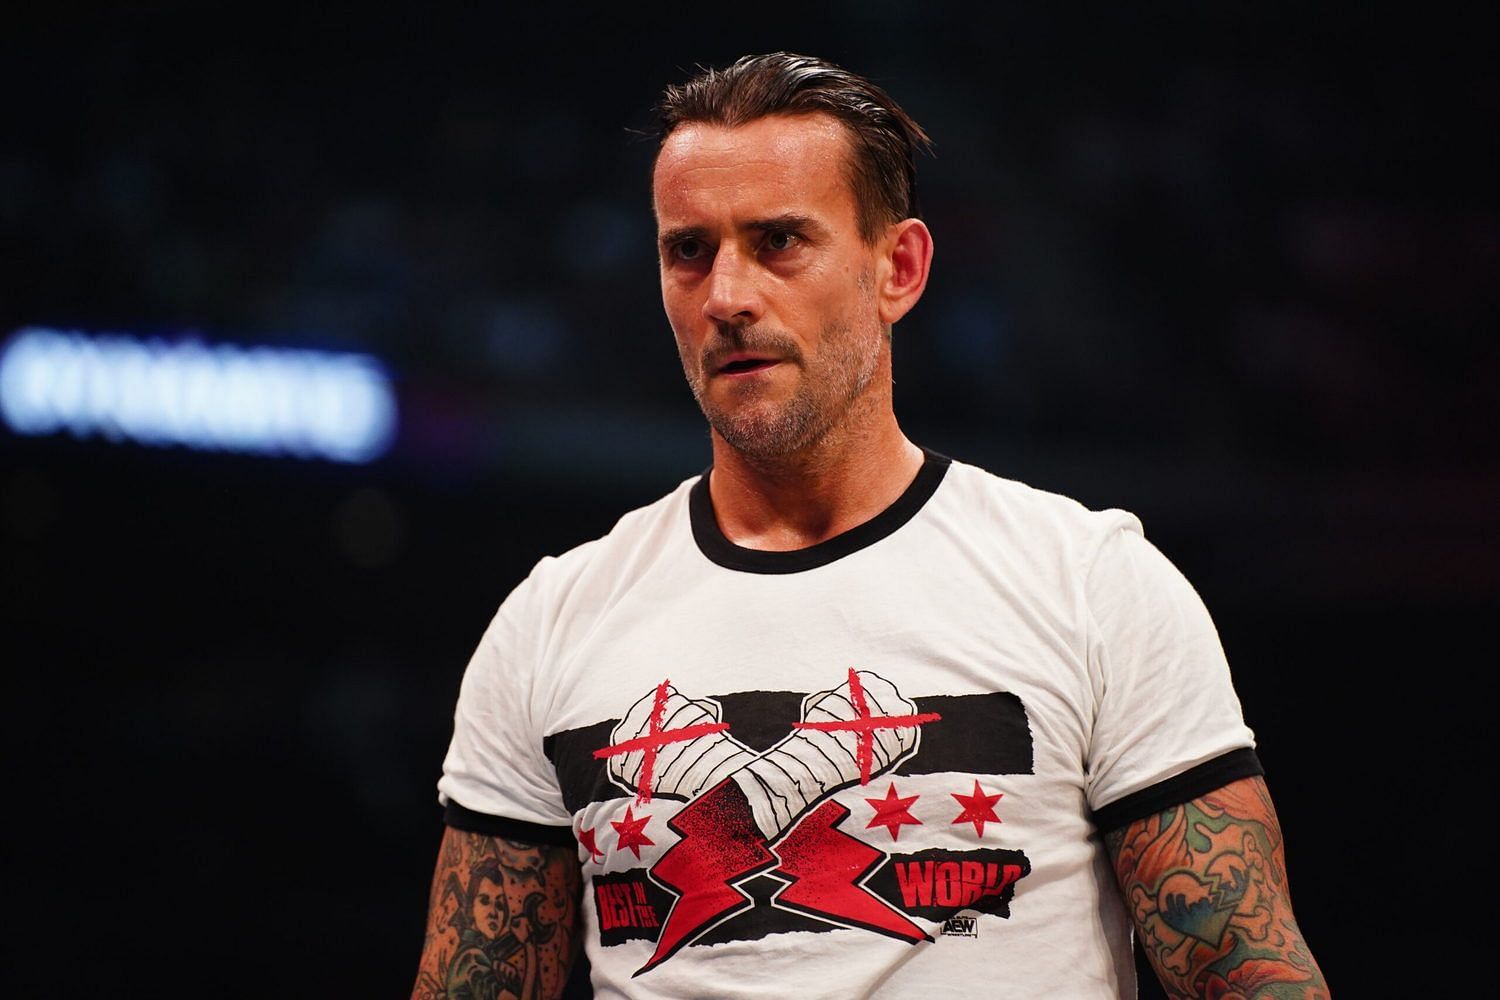 CM Punk made his AEW debut at The First Dance